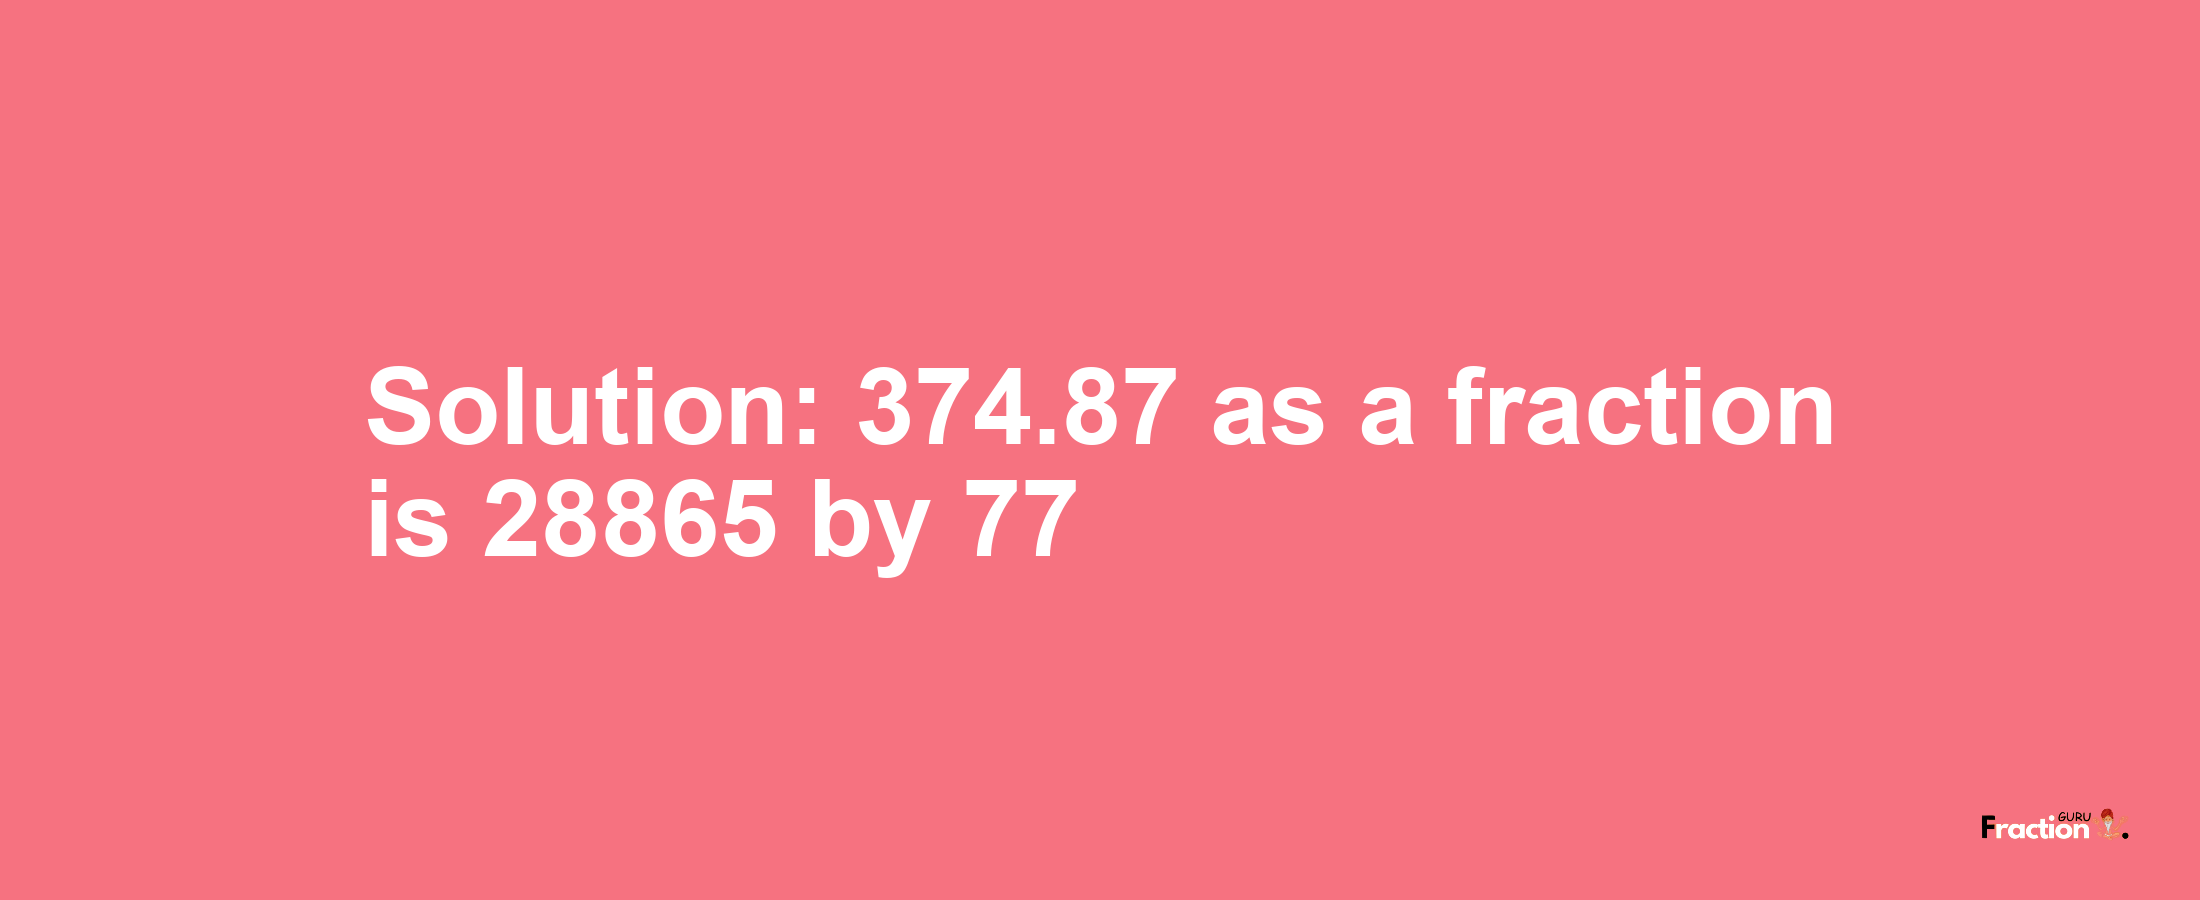 Solution:374.87 as a fraction is 28865/77